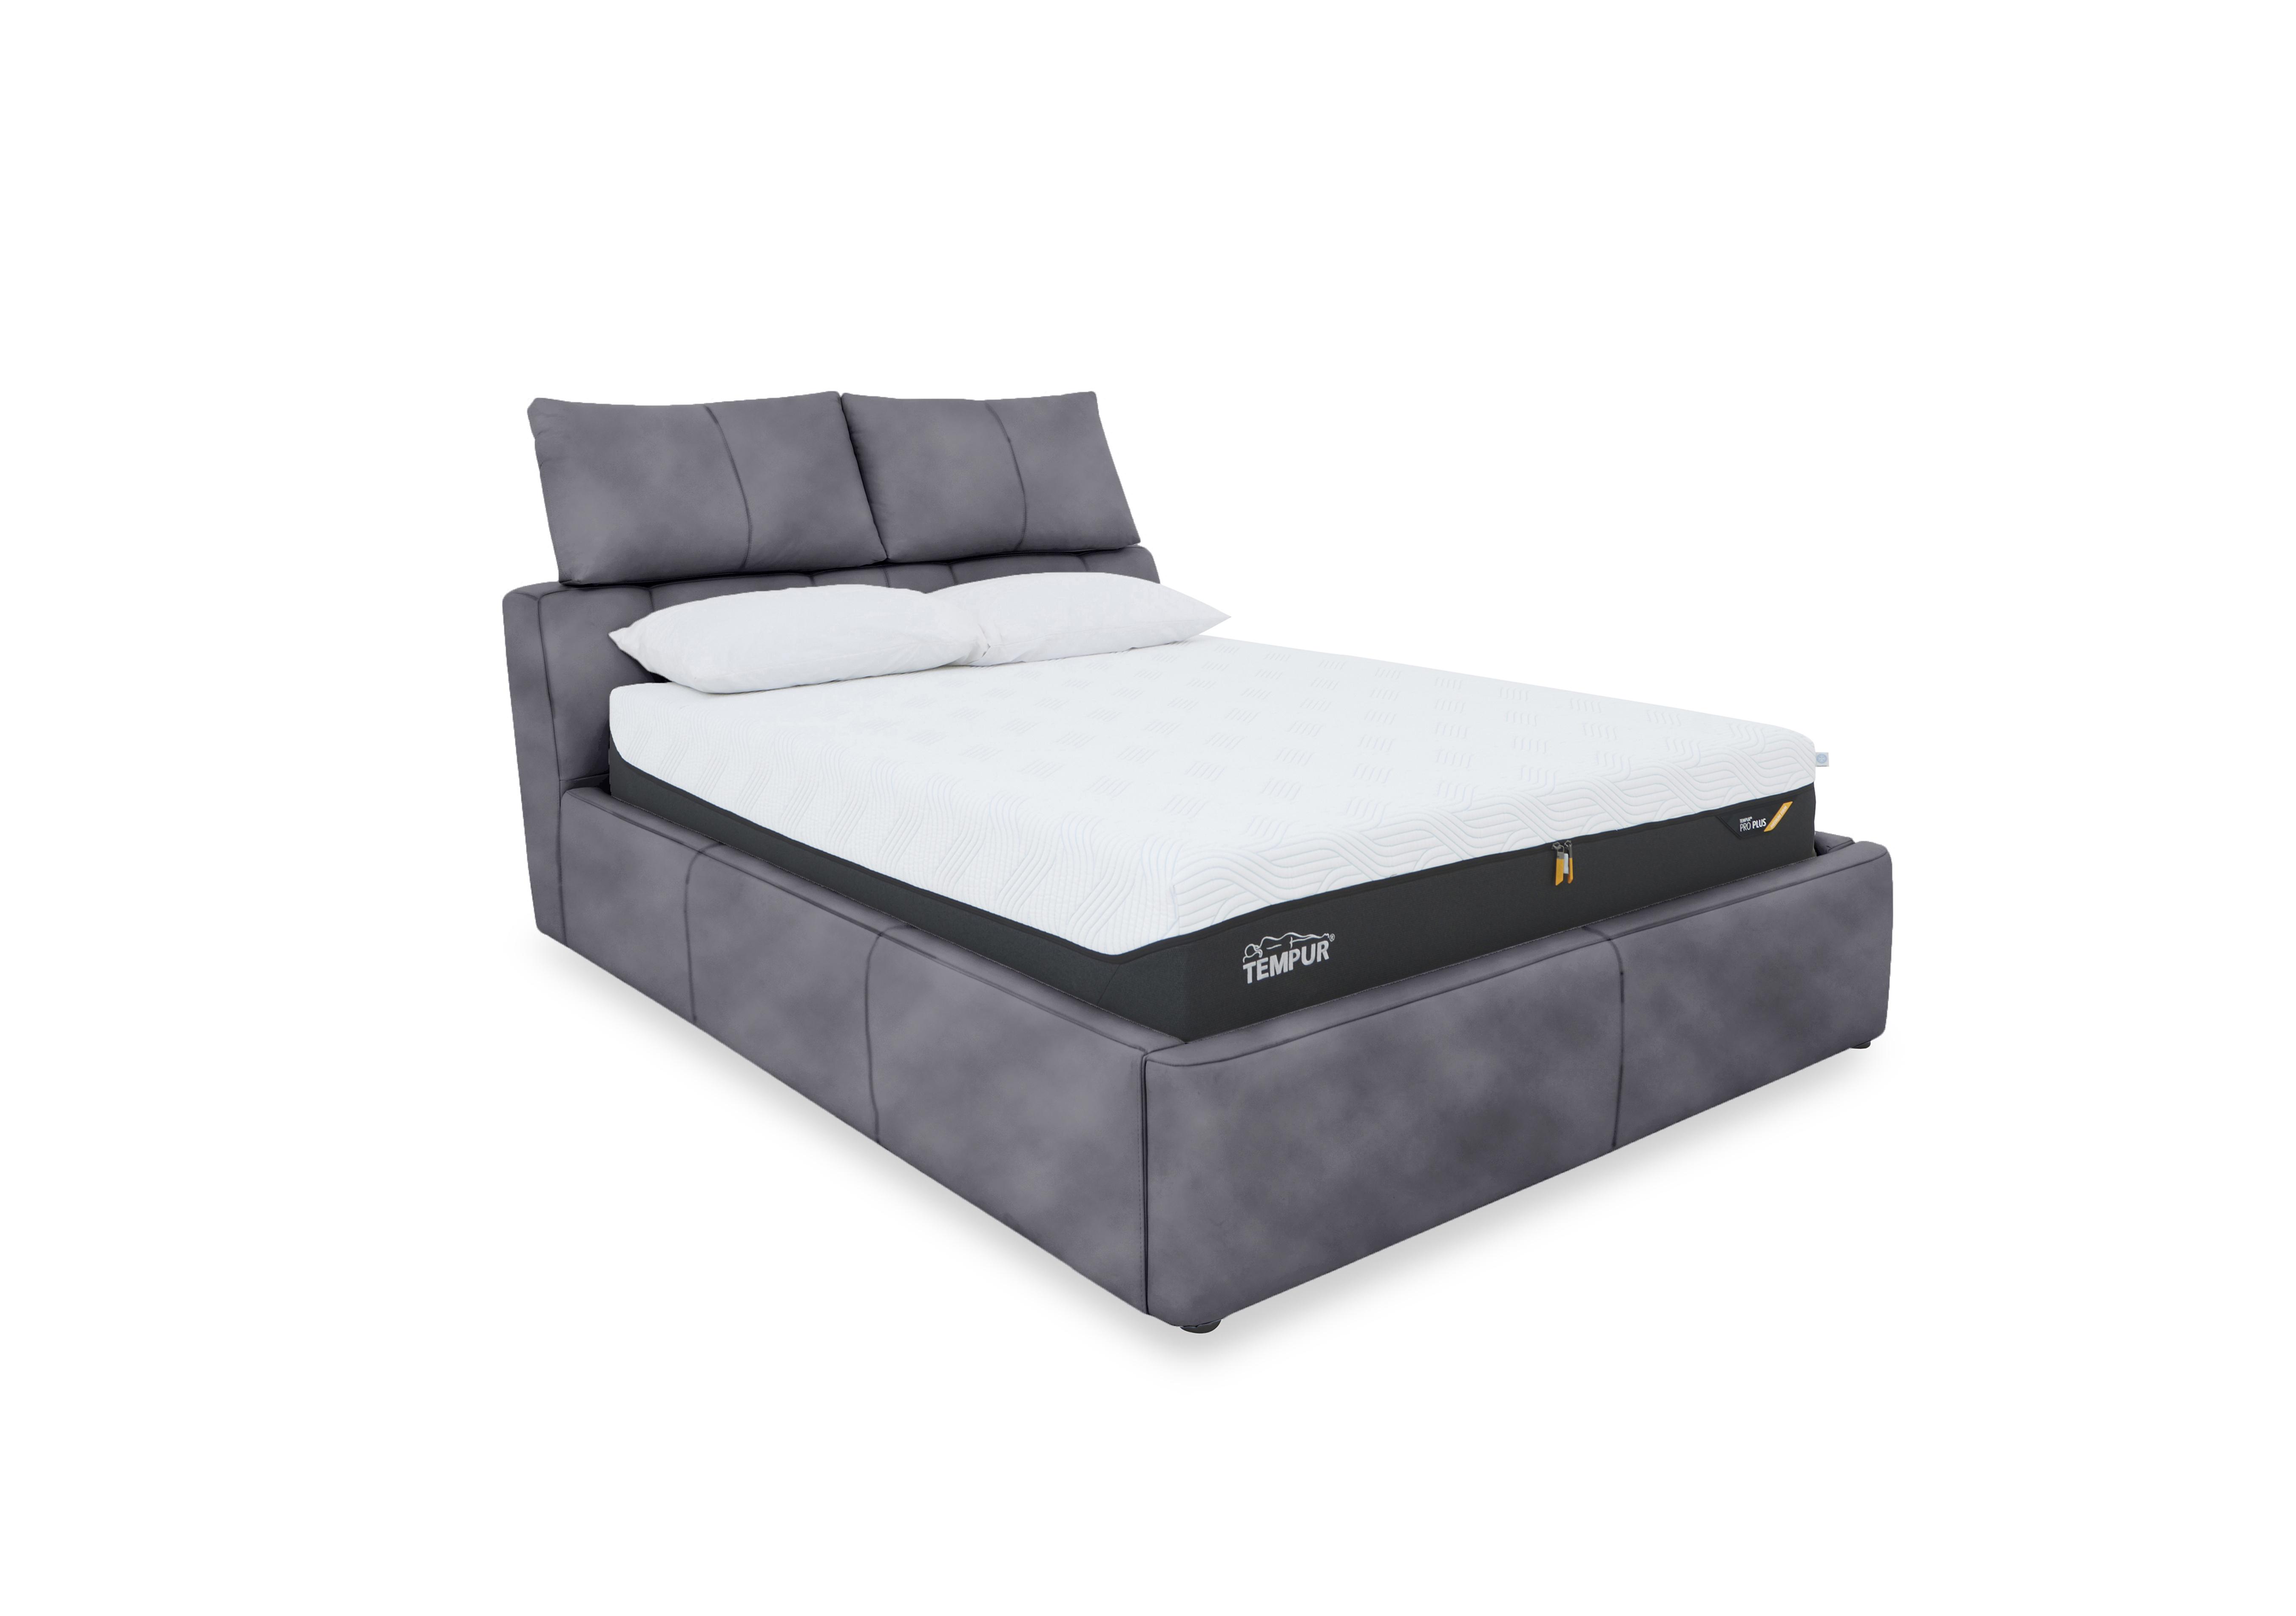 Tyrell Fabric Manual Ottoman Bed Frame in Sfa-Pey-R12 Elephant on Furniture Village